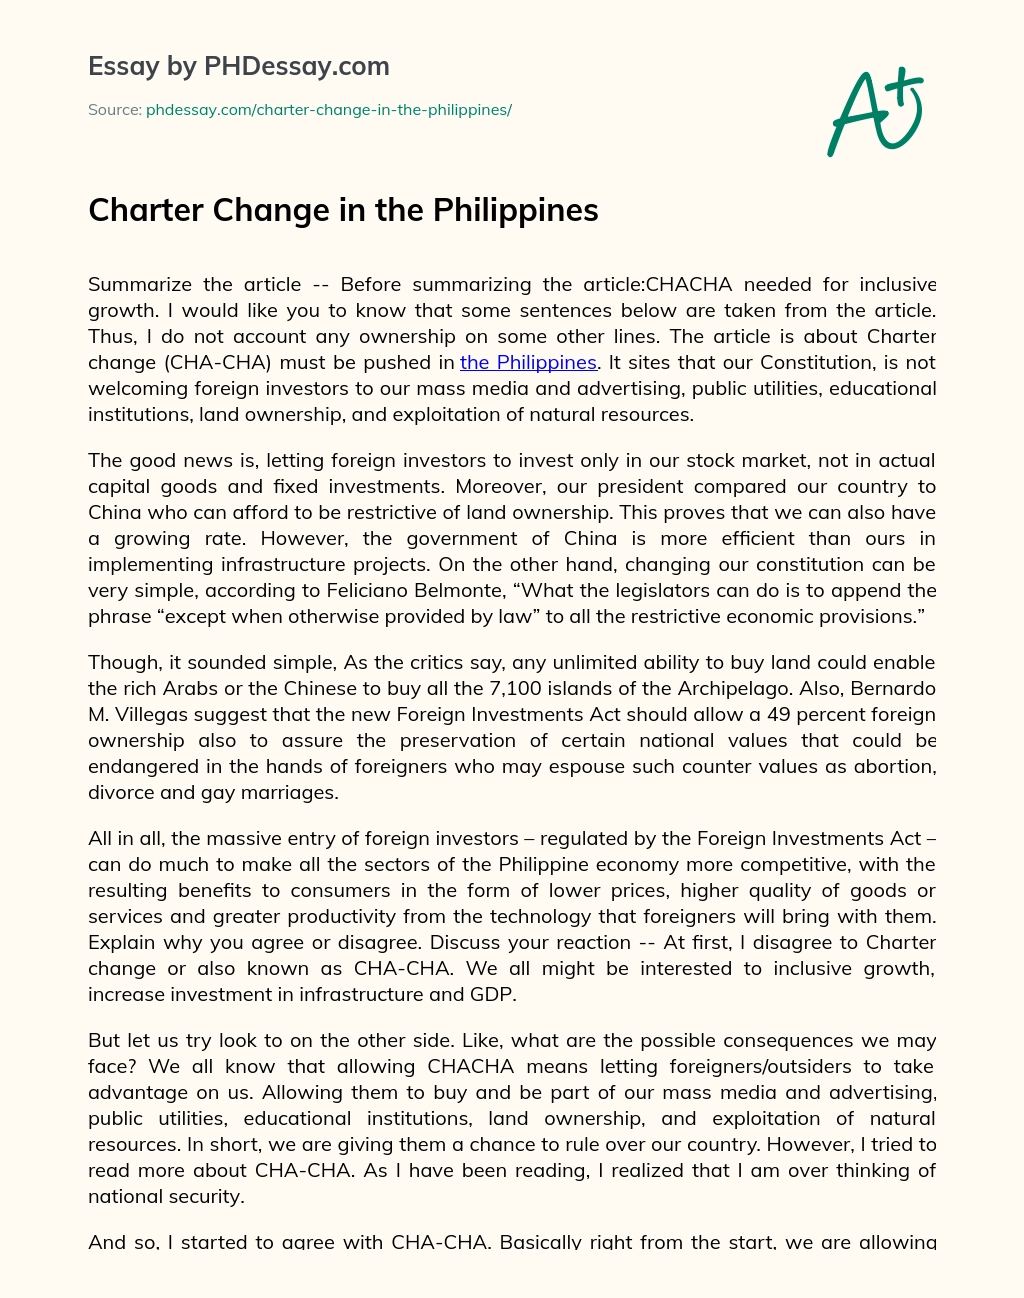 Charter Change in the Philippines essay